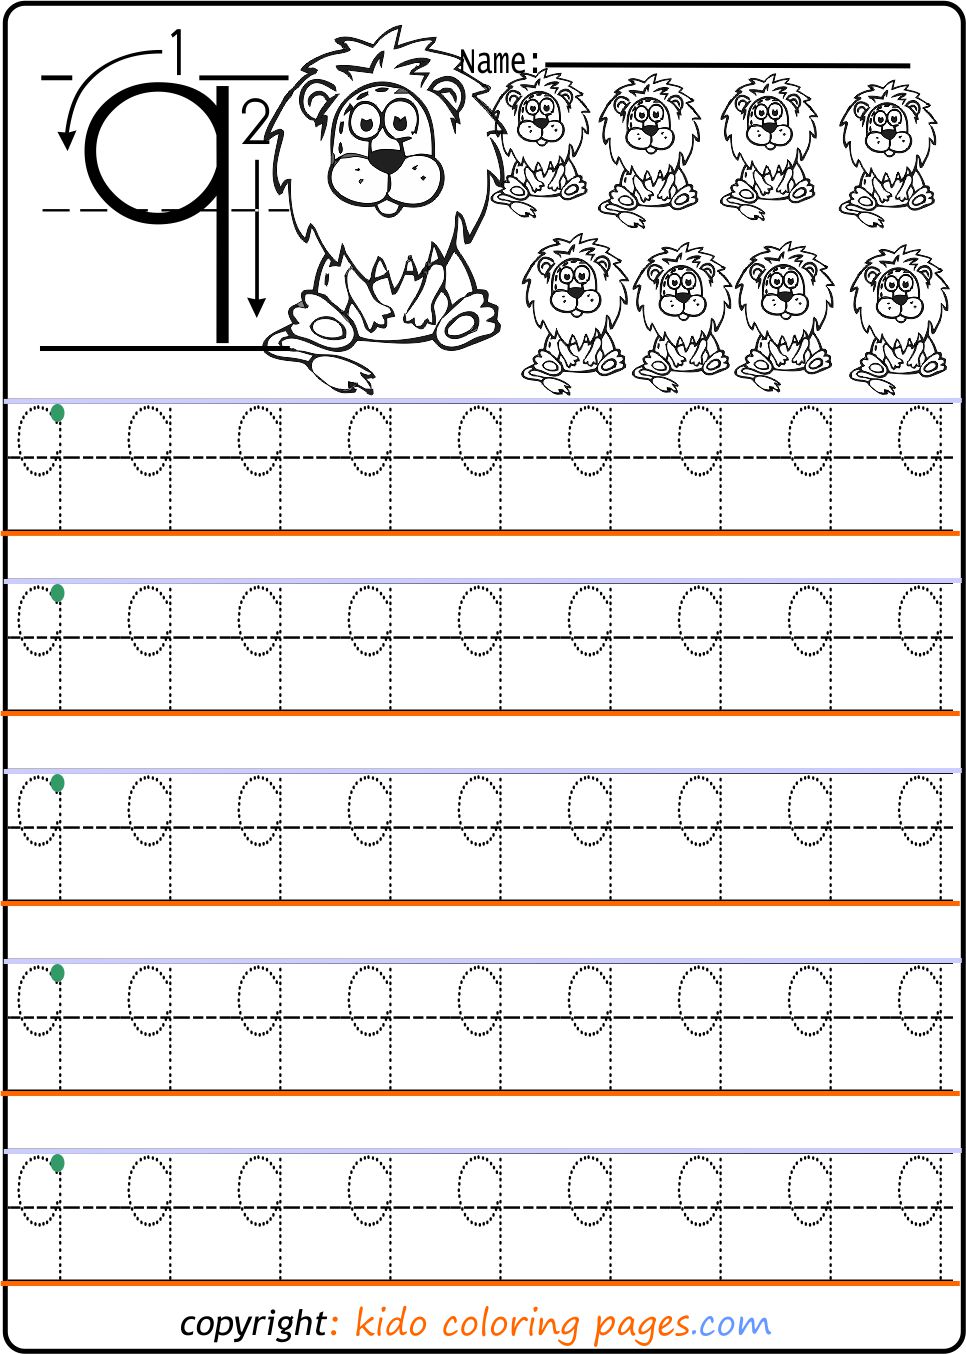 worksheets-kids-coloring-pages